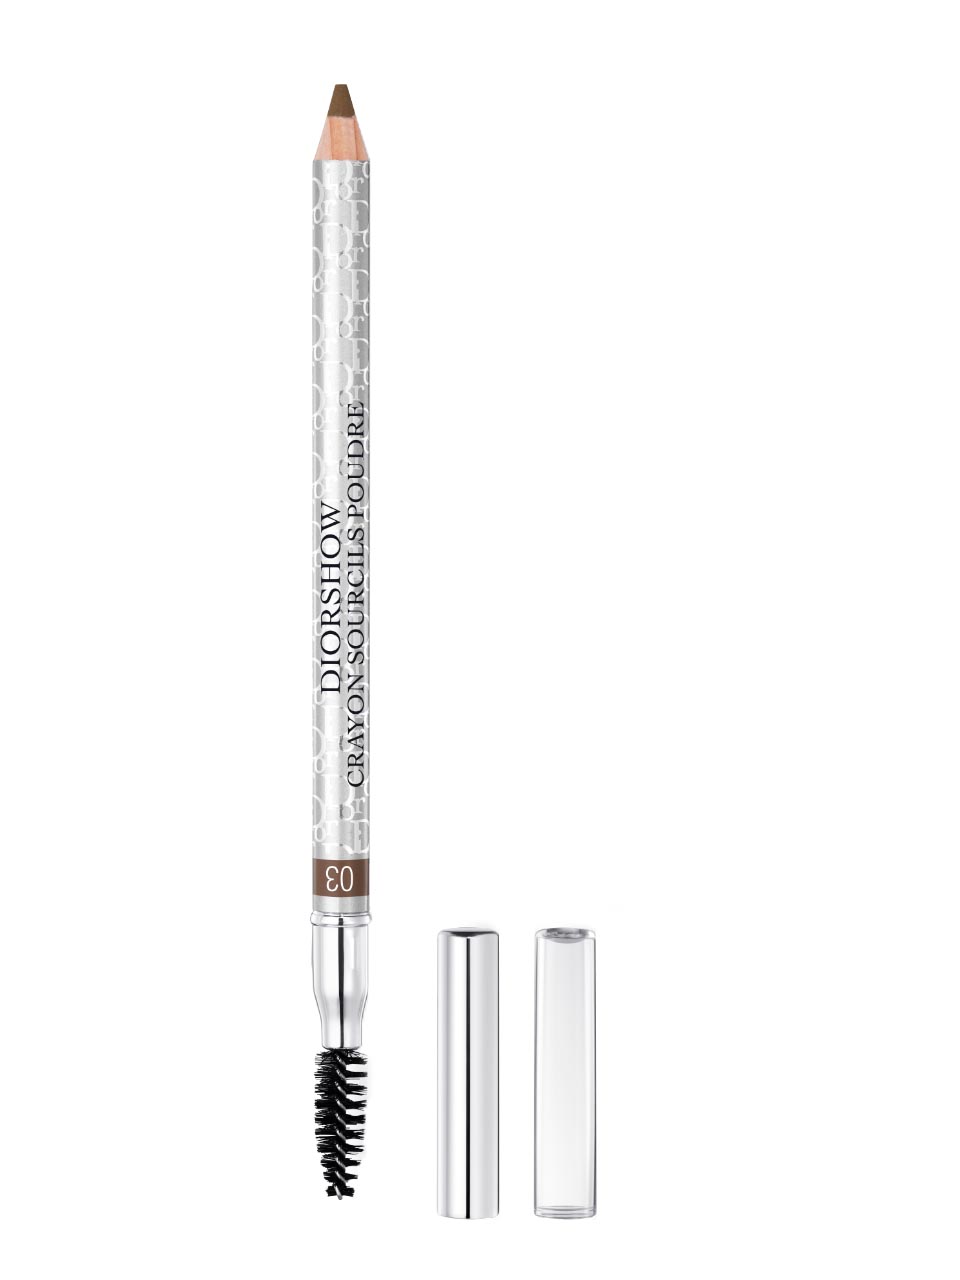 Dior Diorshow Expert Crayons Sourcils Poudre Eyebrow Pencil N° 01 Blond null - onesize - 1